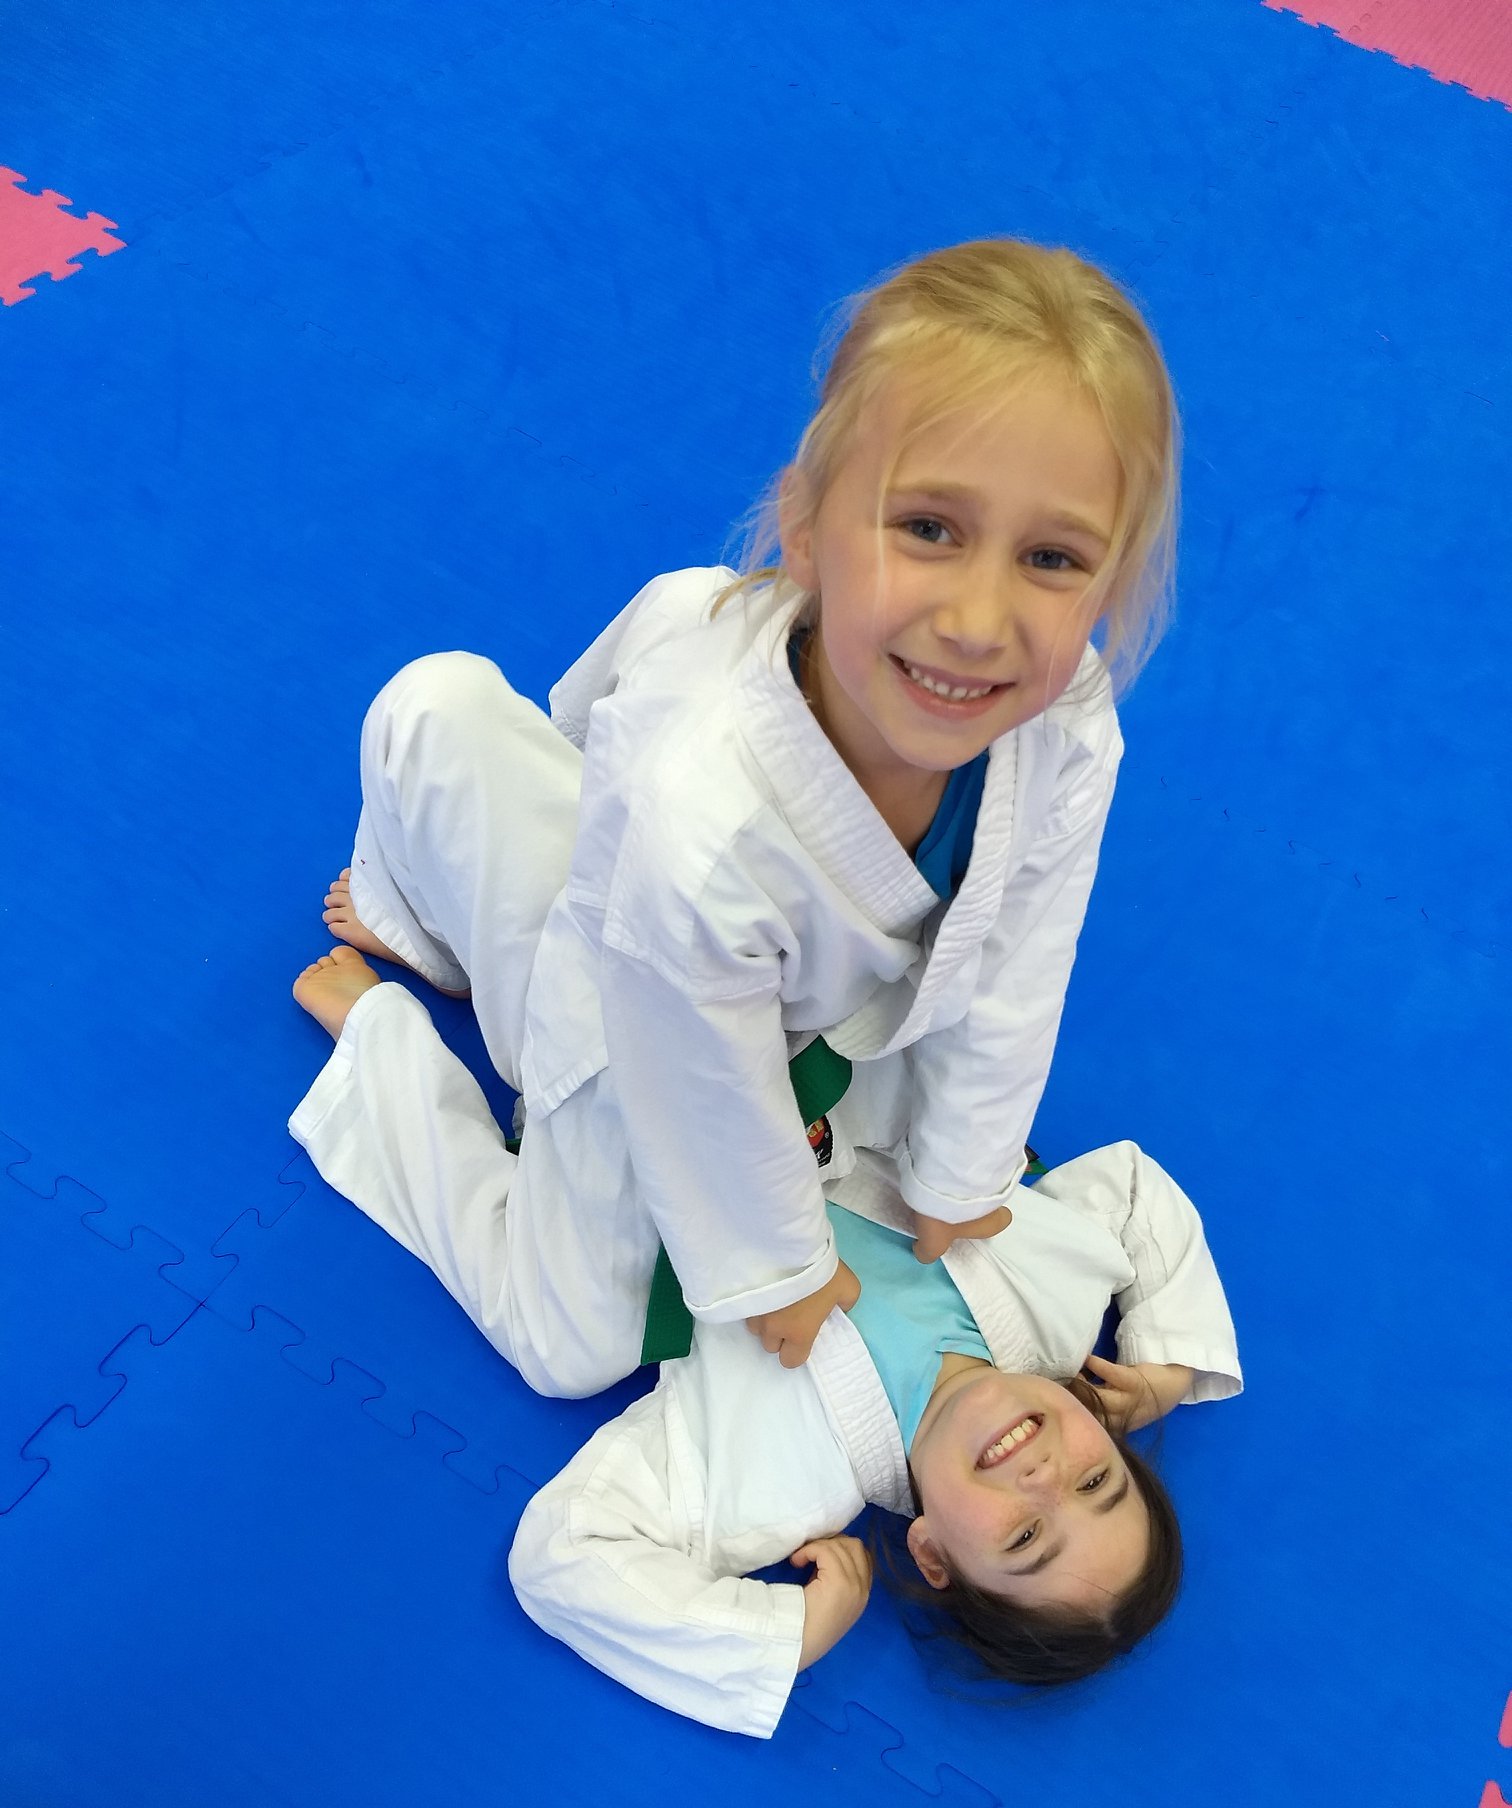 Actionable Steps to Find a Good Martial Arts School